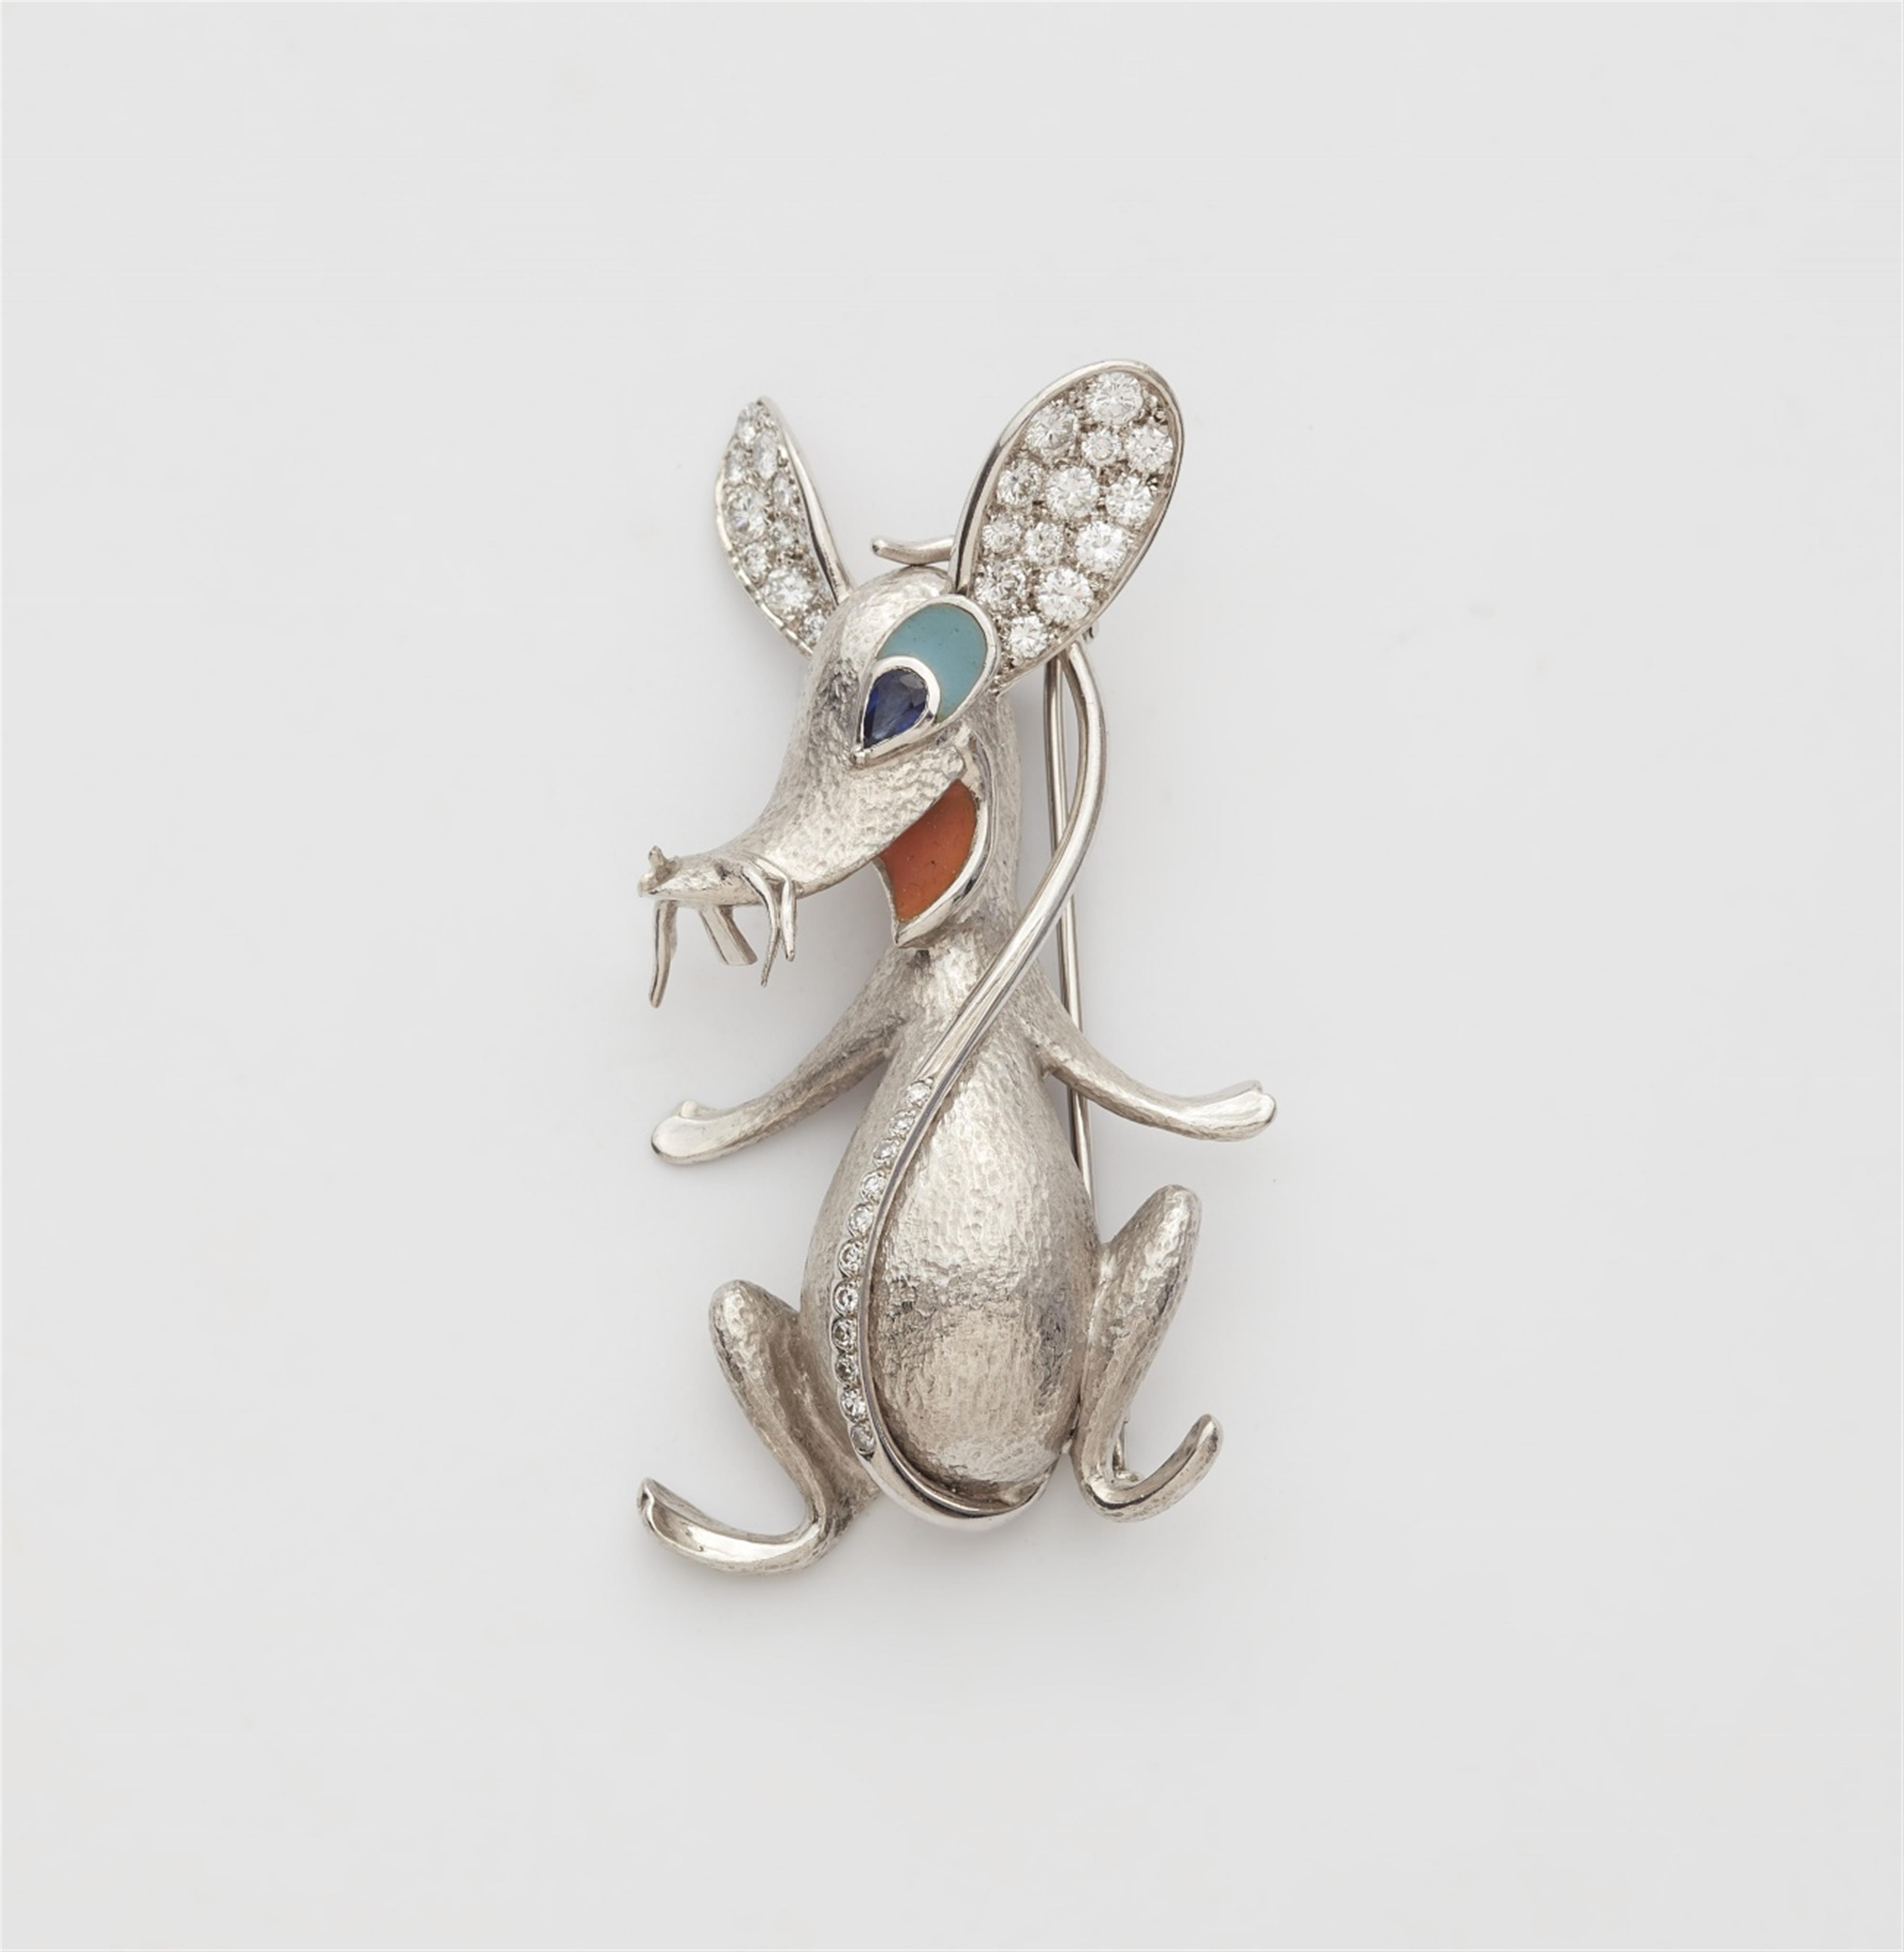 An 18k white gold mouse brooch - image-1